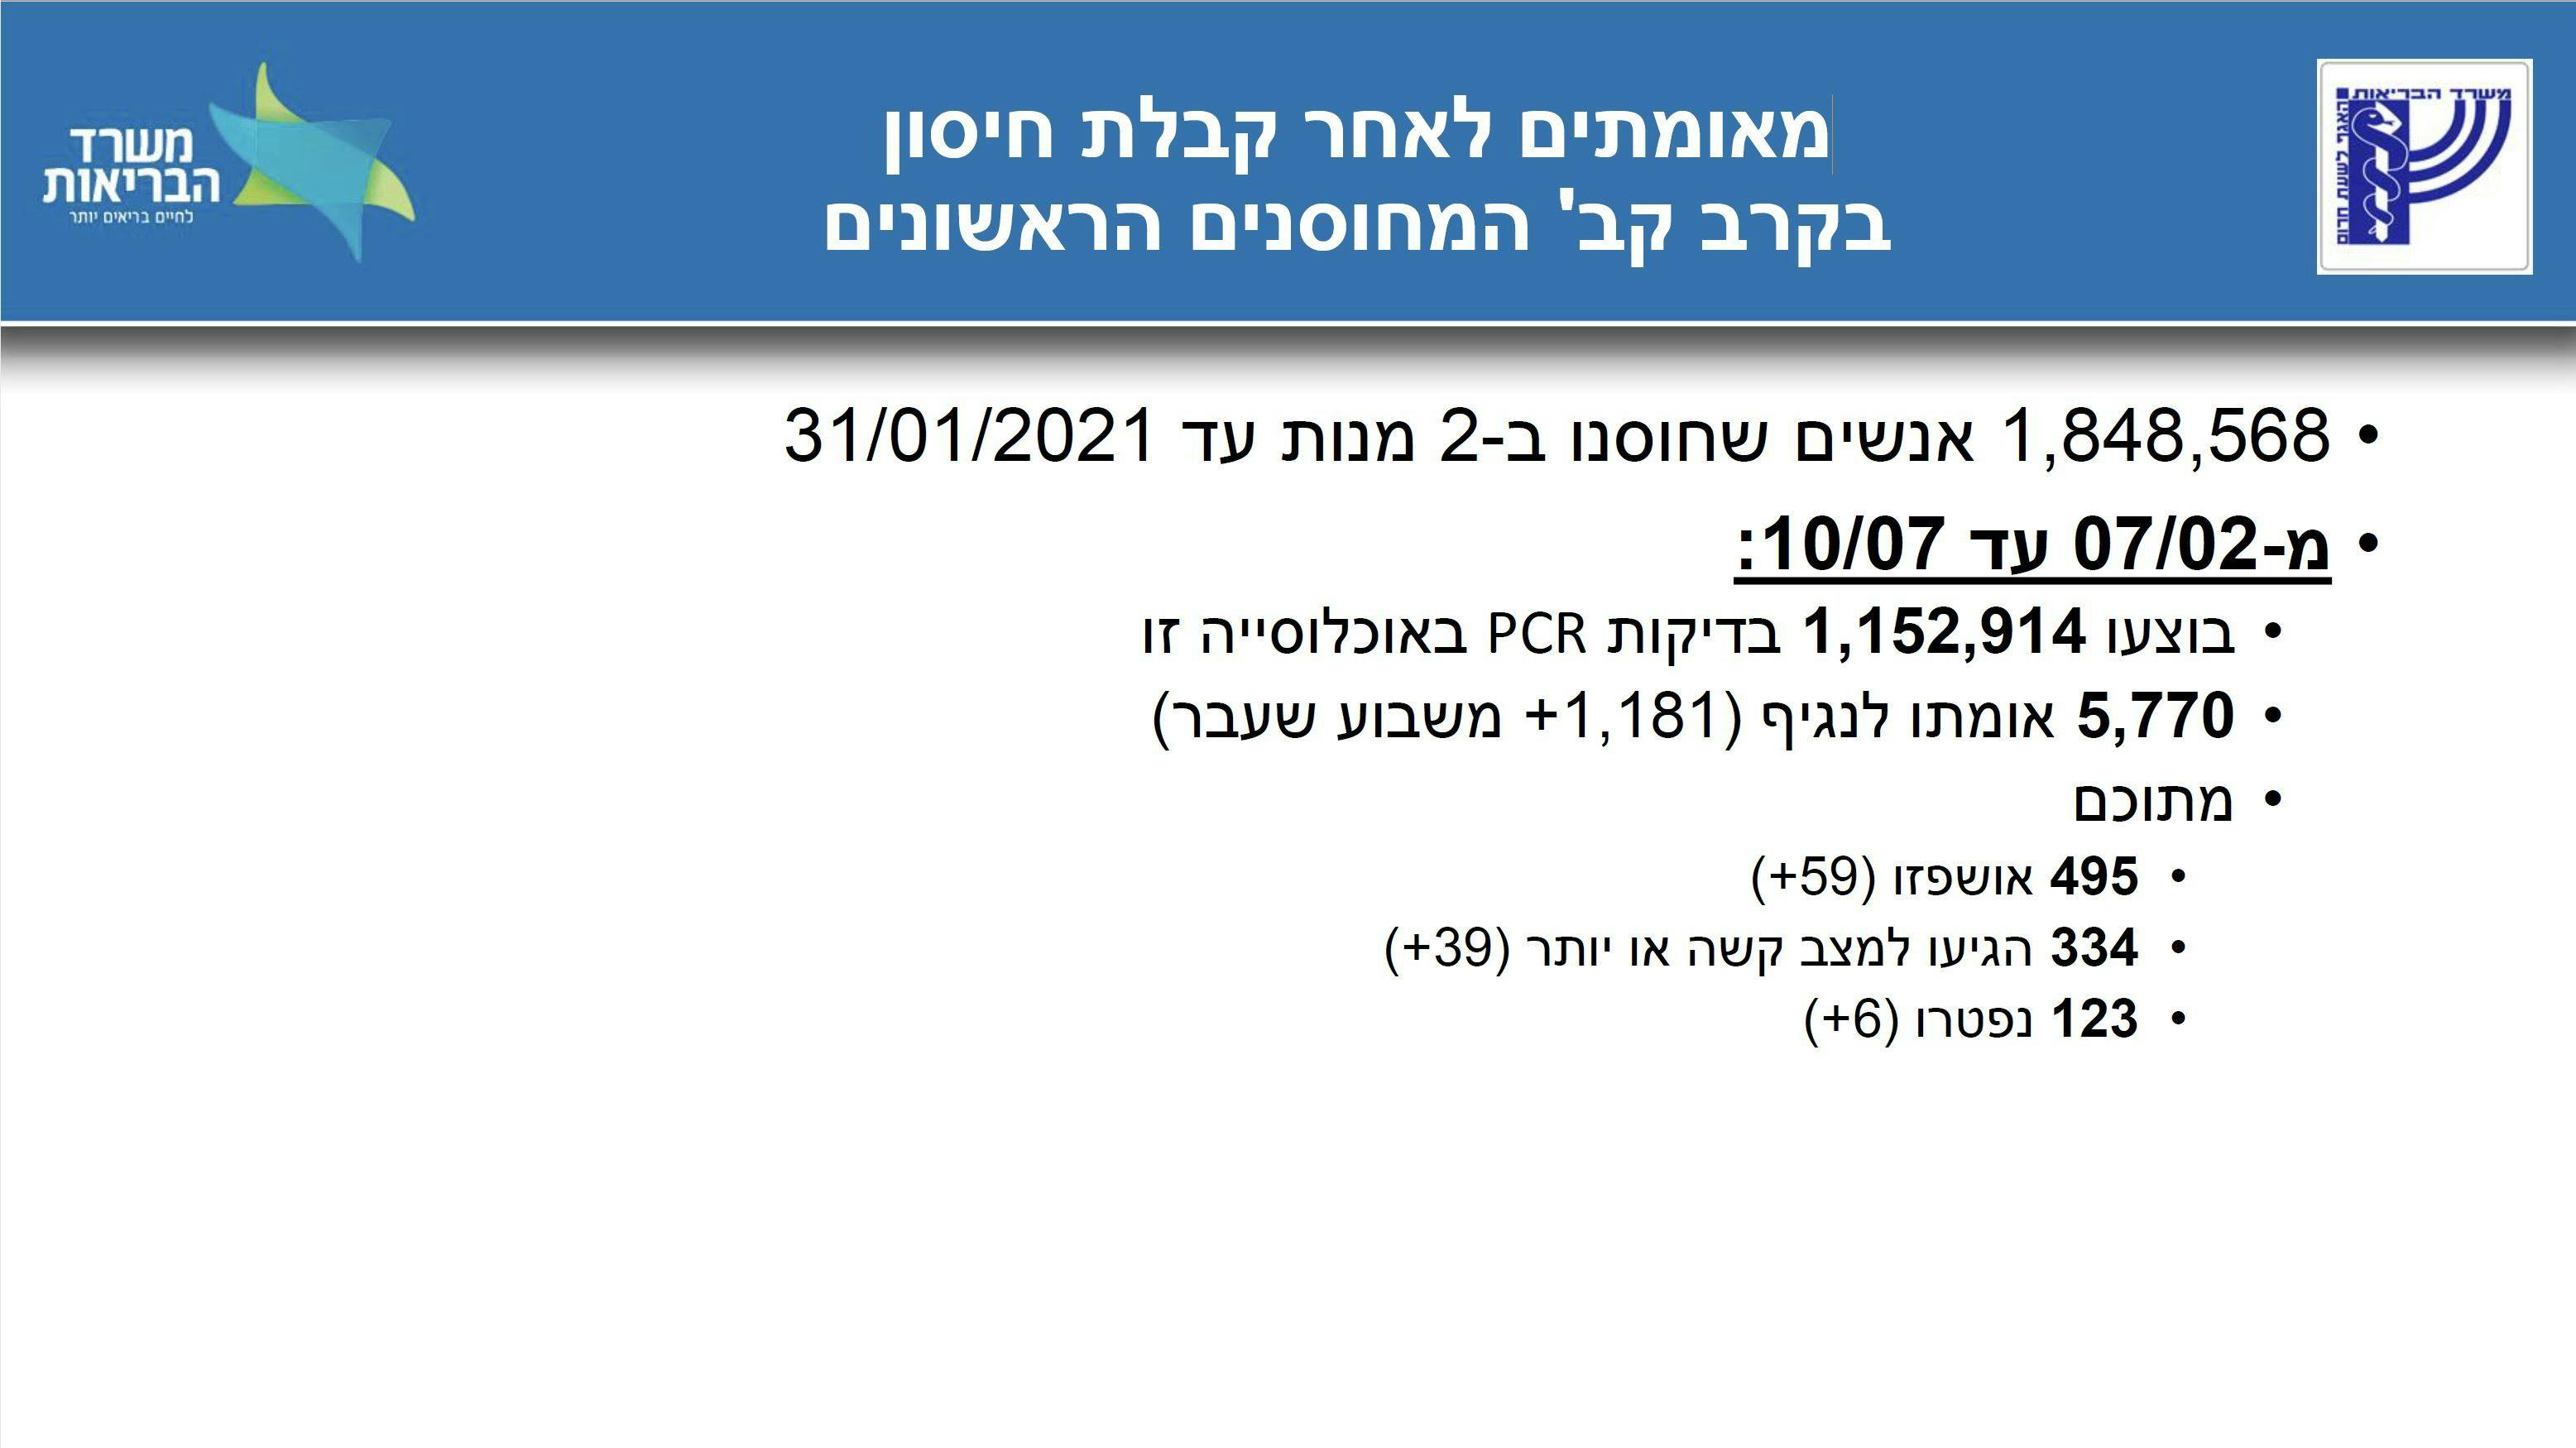 Source: Ministry of Health of Israel

It is in Hebrew but here is our translation:

Title: Verified after receiving the vaccine, Among the first vaccinated group
From the 1,848,568 people that received two doses of the vaccine by Jan. 31, 2021:
From 07/02 to 10/07 (From Feb. 7, 2021 to July 10, 2021)
1,152,194 got PCR tested
5,770 got corona since vaccination, of which:

* 495 were hospitalized
* 334 were difficult cases or worse (life threatening)
* 123 died